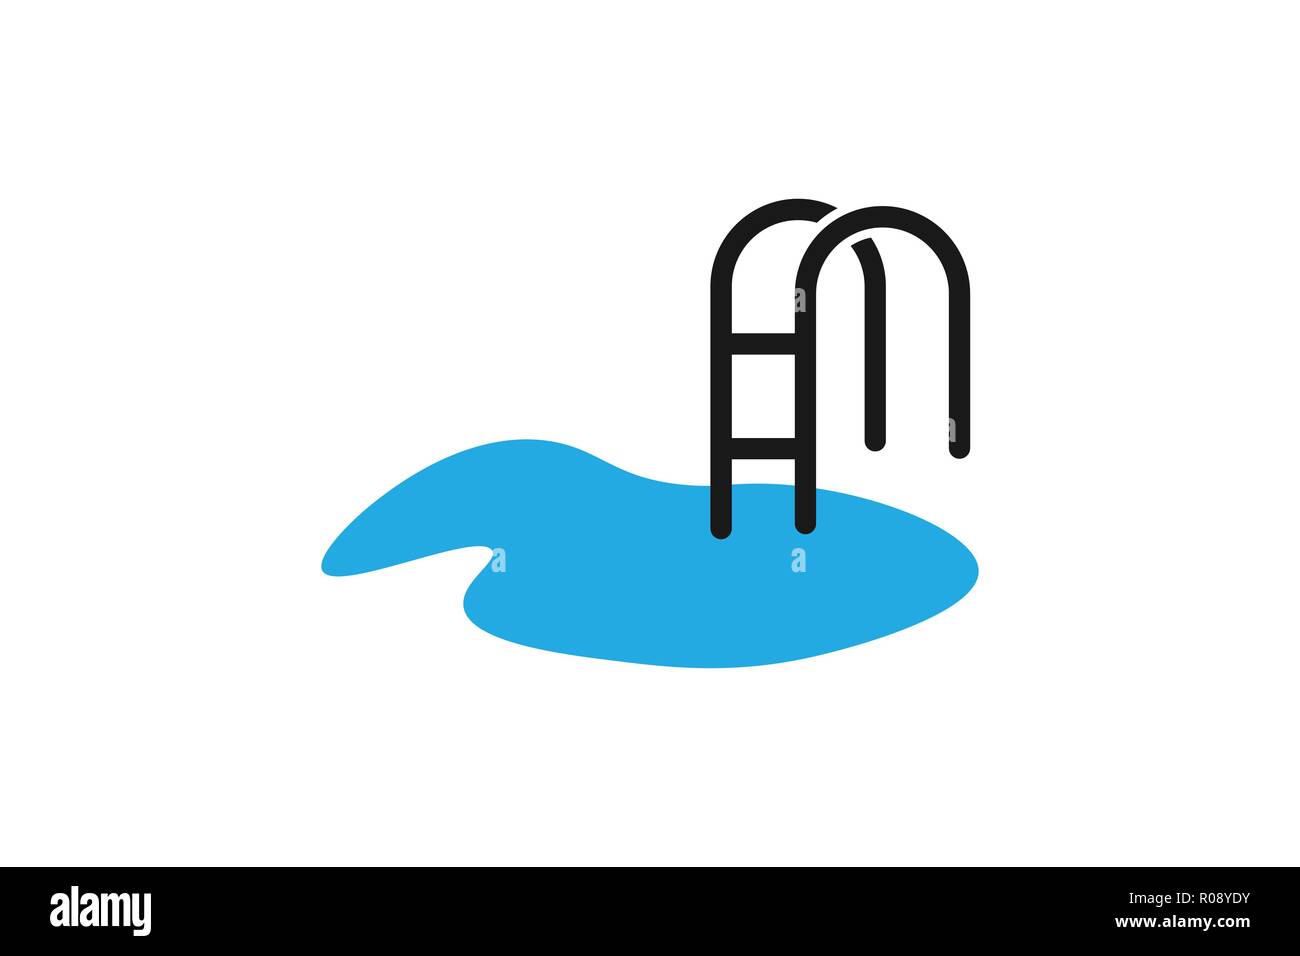 Water Stair Beach Swimming Pool Logo Design Inspiration Isolated